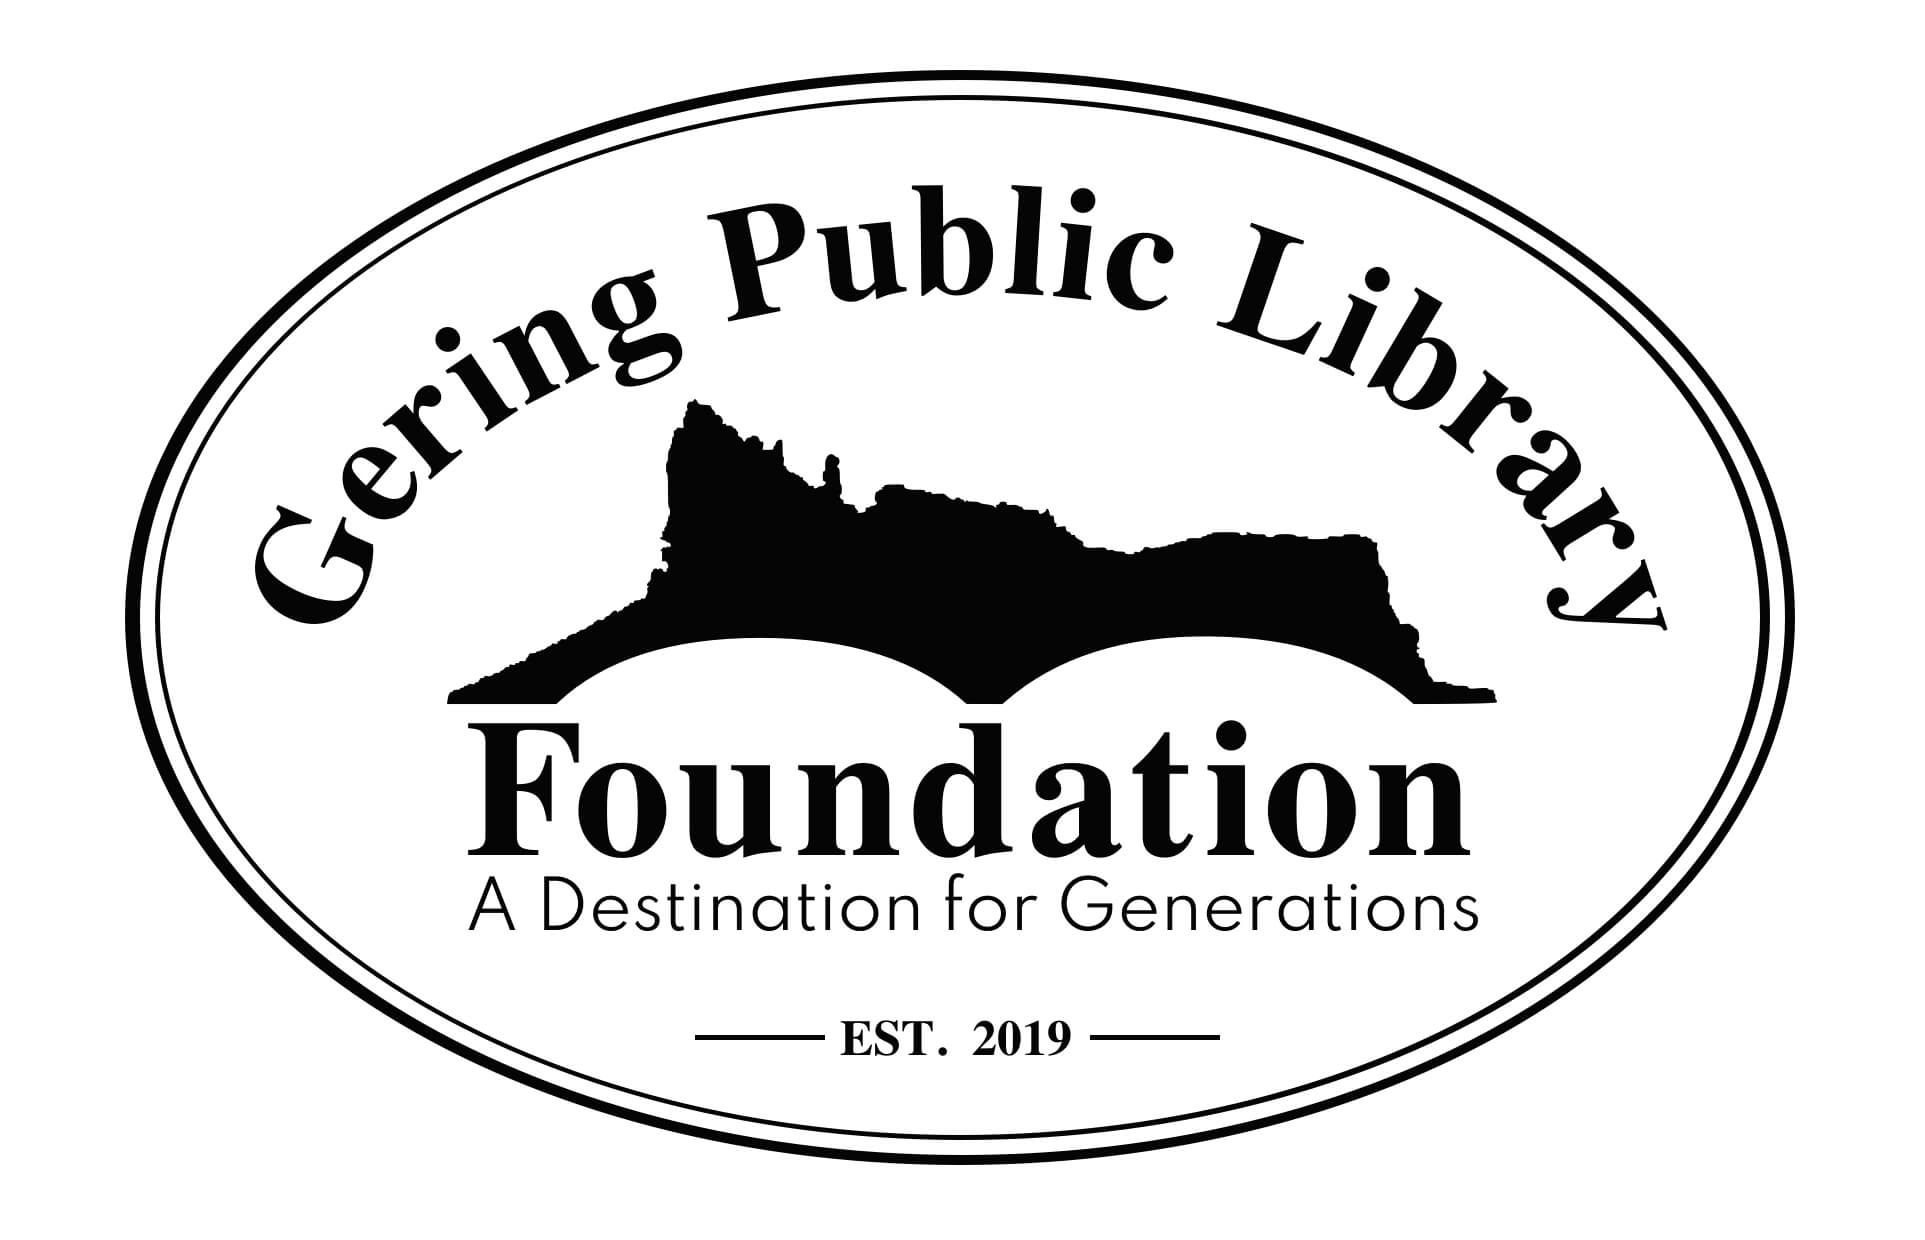 Gering Public Library Foundation Logo. Blue and White with name and "a destination for generations" slogan with Established in 2019 stamp. Bluffs/mountains in back ground all oval shaped